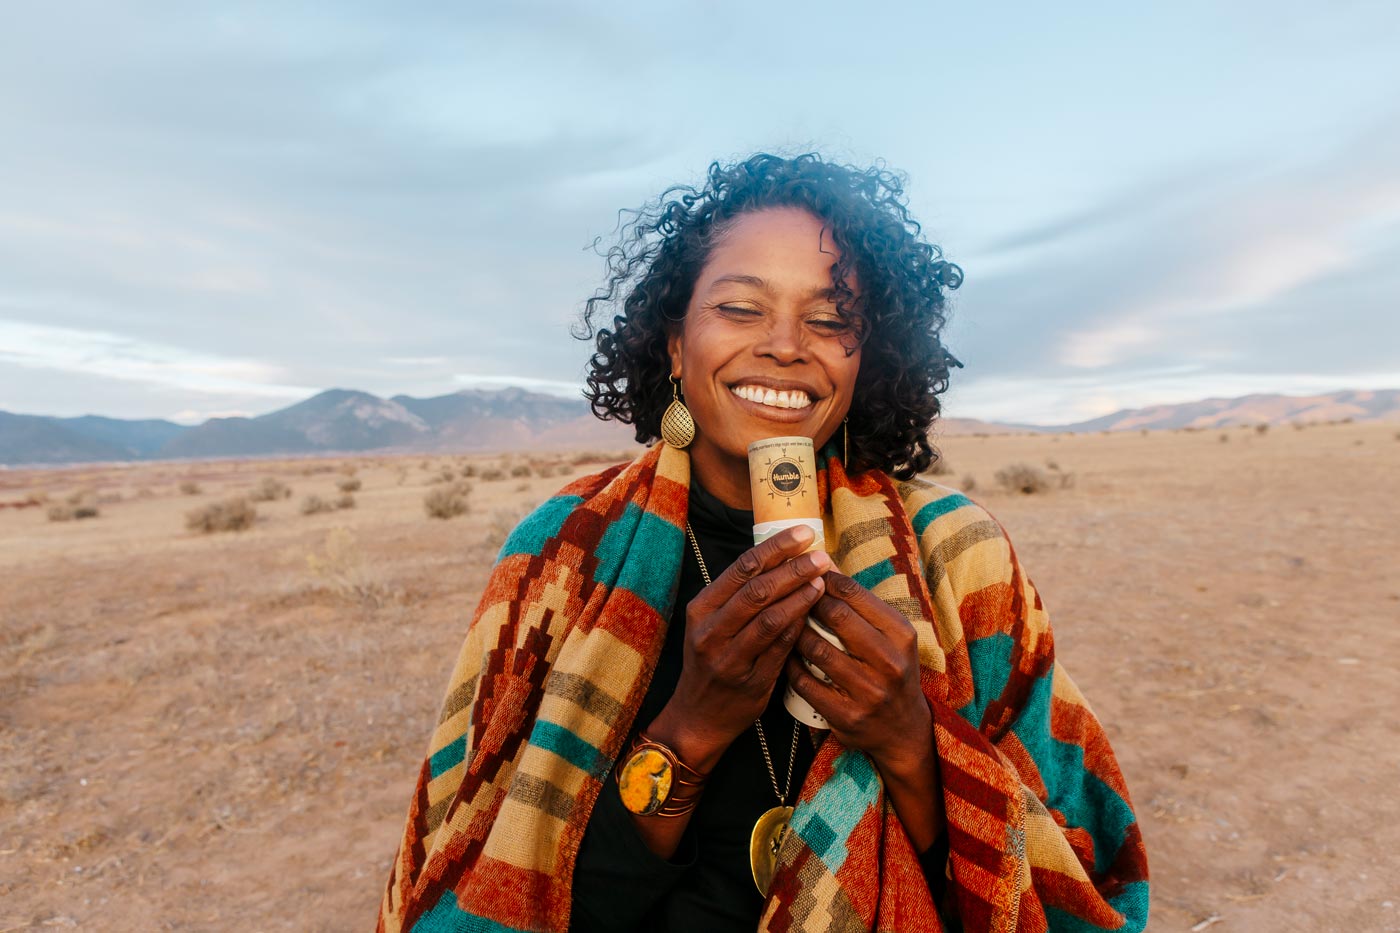 a smiling woman in a colorful jacket holds a deodorant stick while standing in the desert 